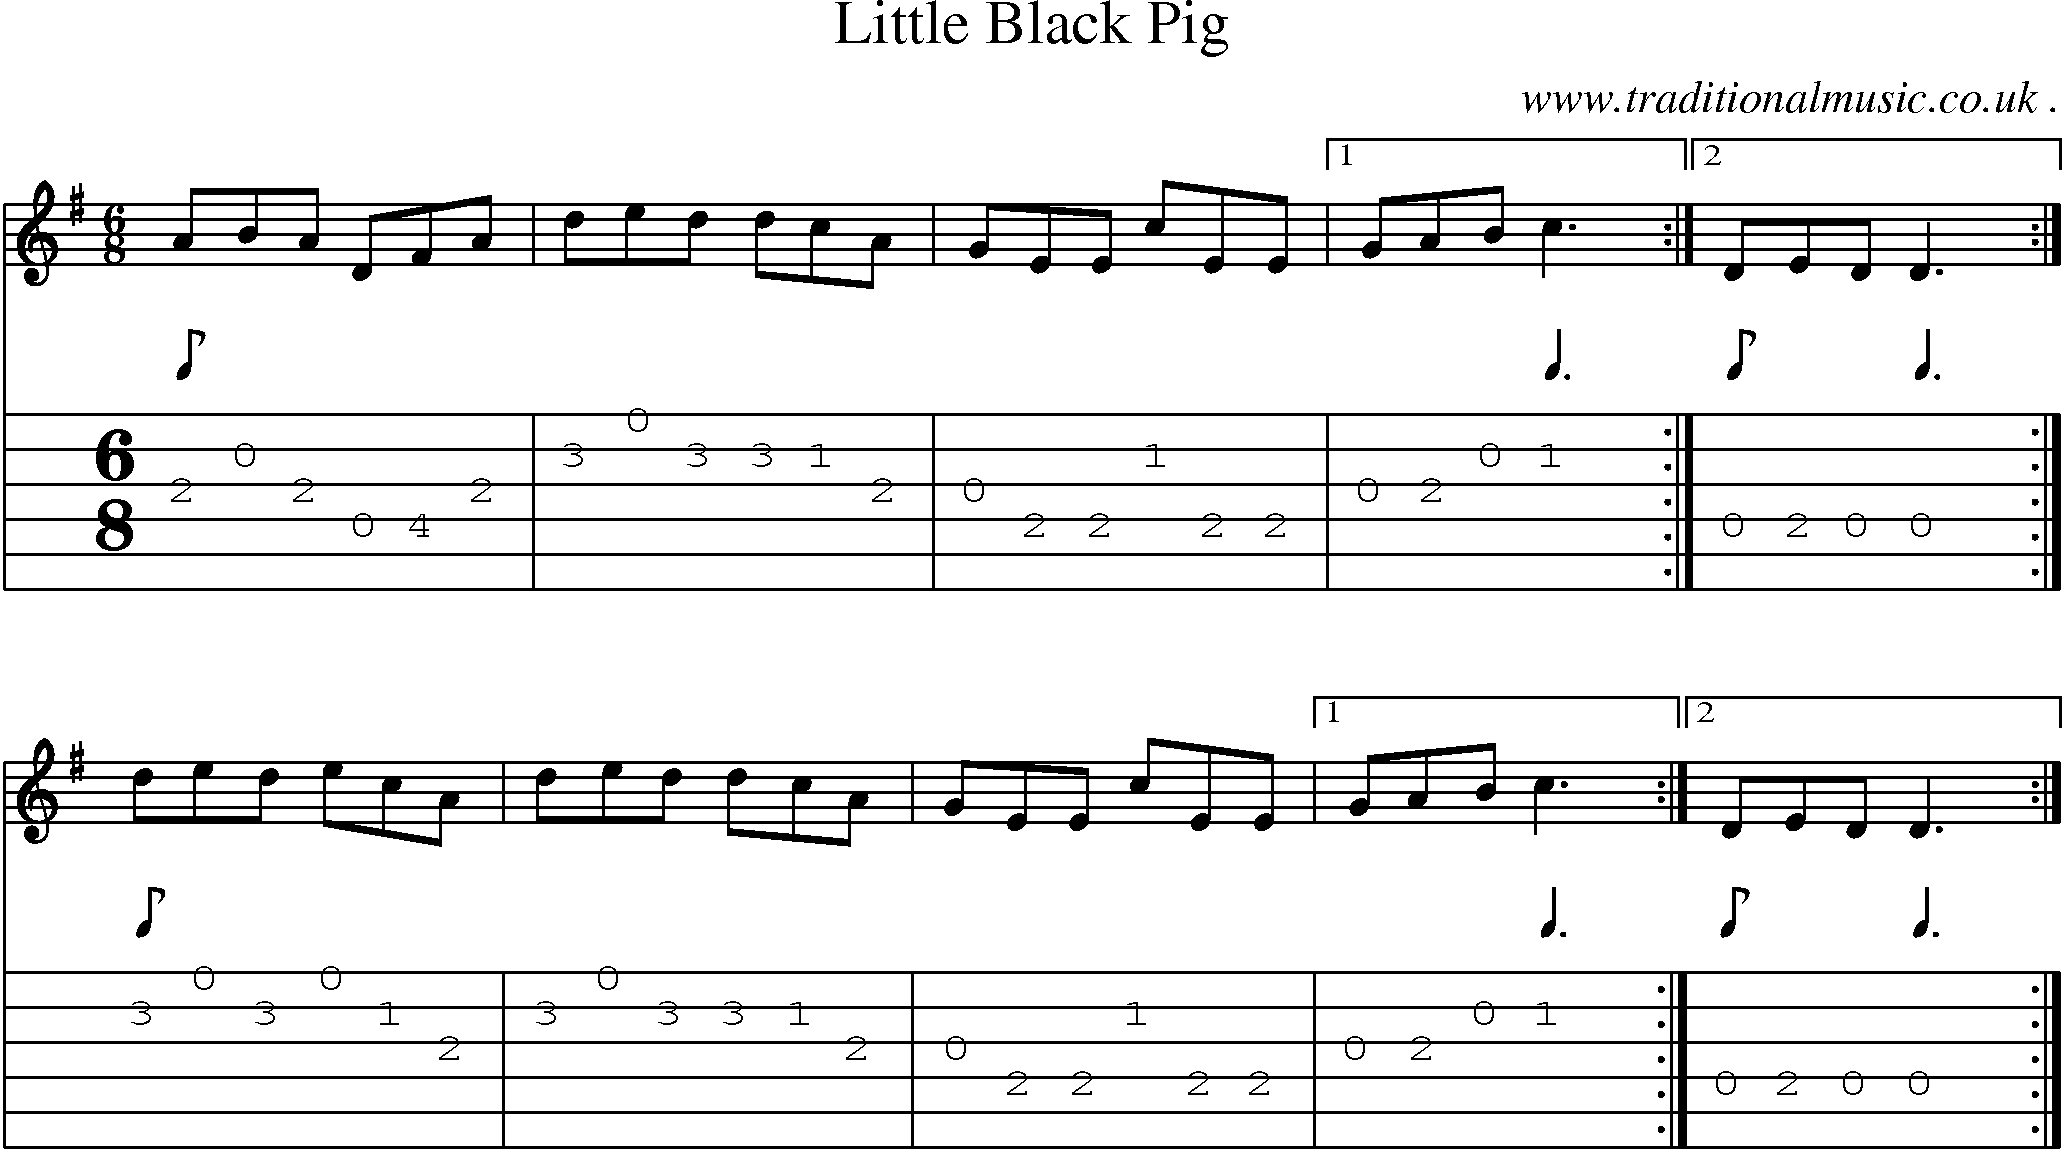 Sheet-Music and Guitar Tabs for Little Black Pig